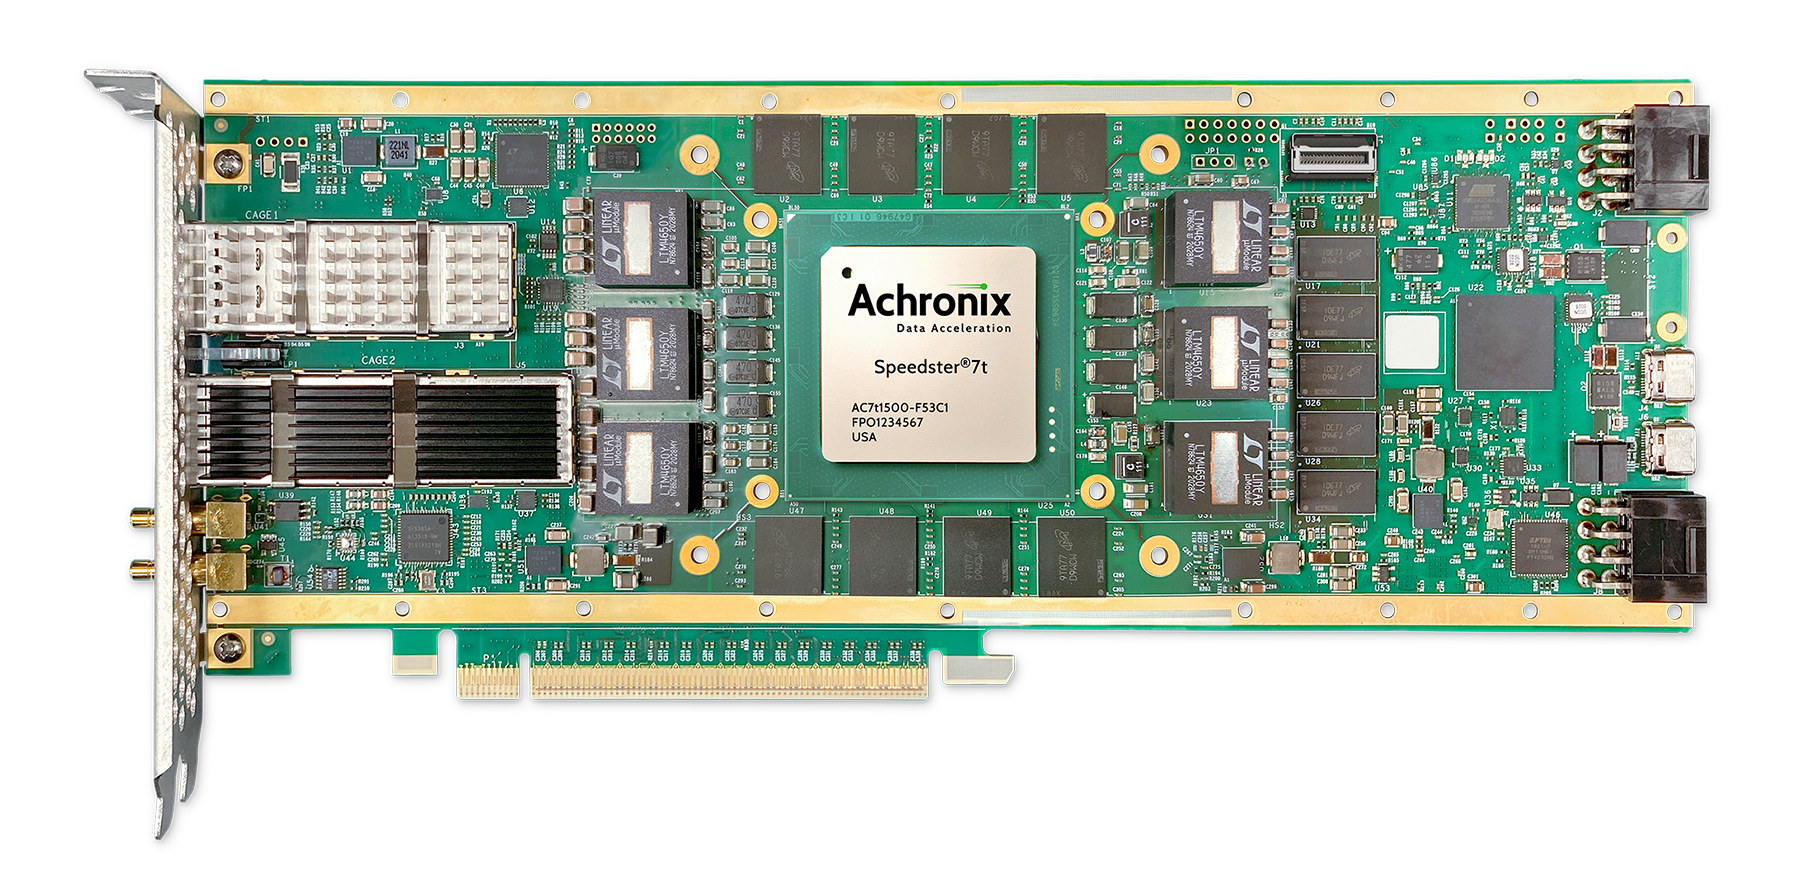 Achronix VectorPath Accelerator Card with Speedster 7t1500 FPGA for running AI inference models and more